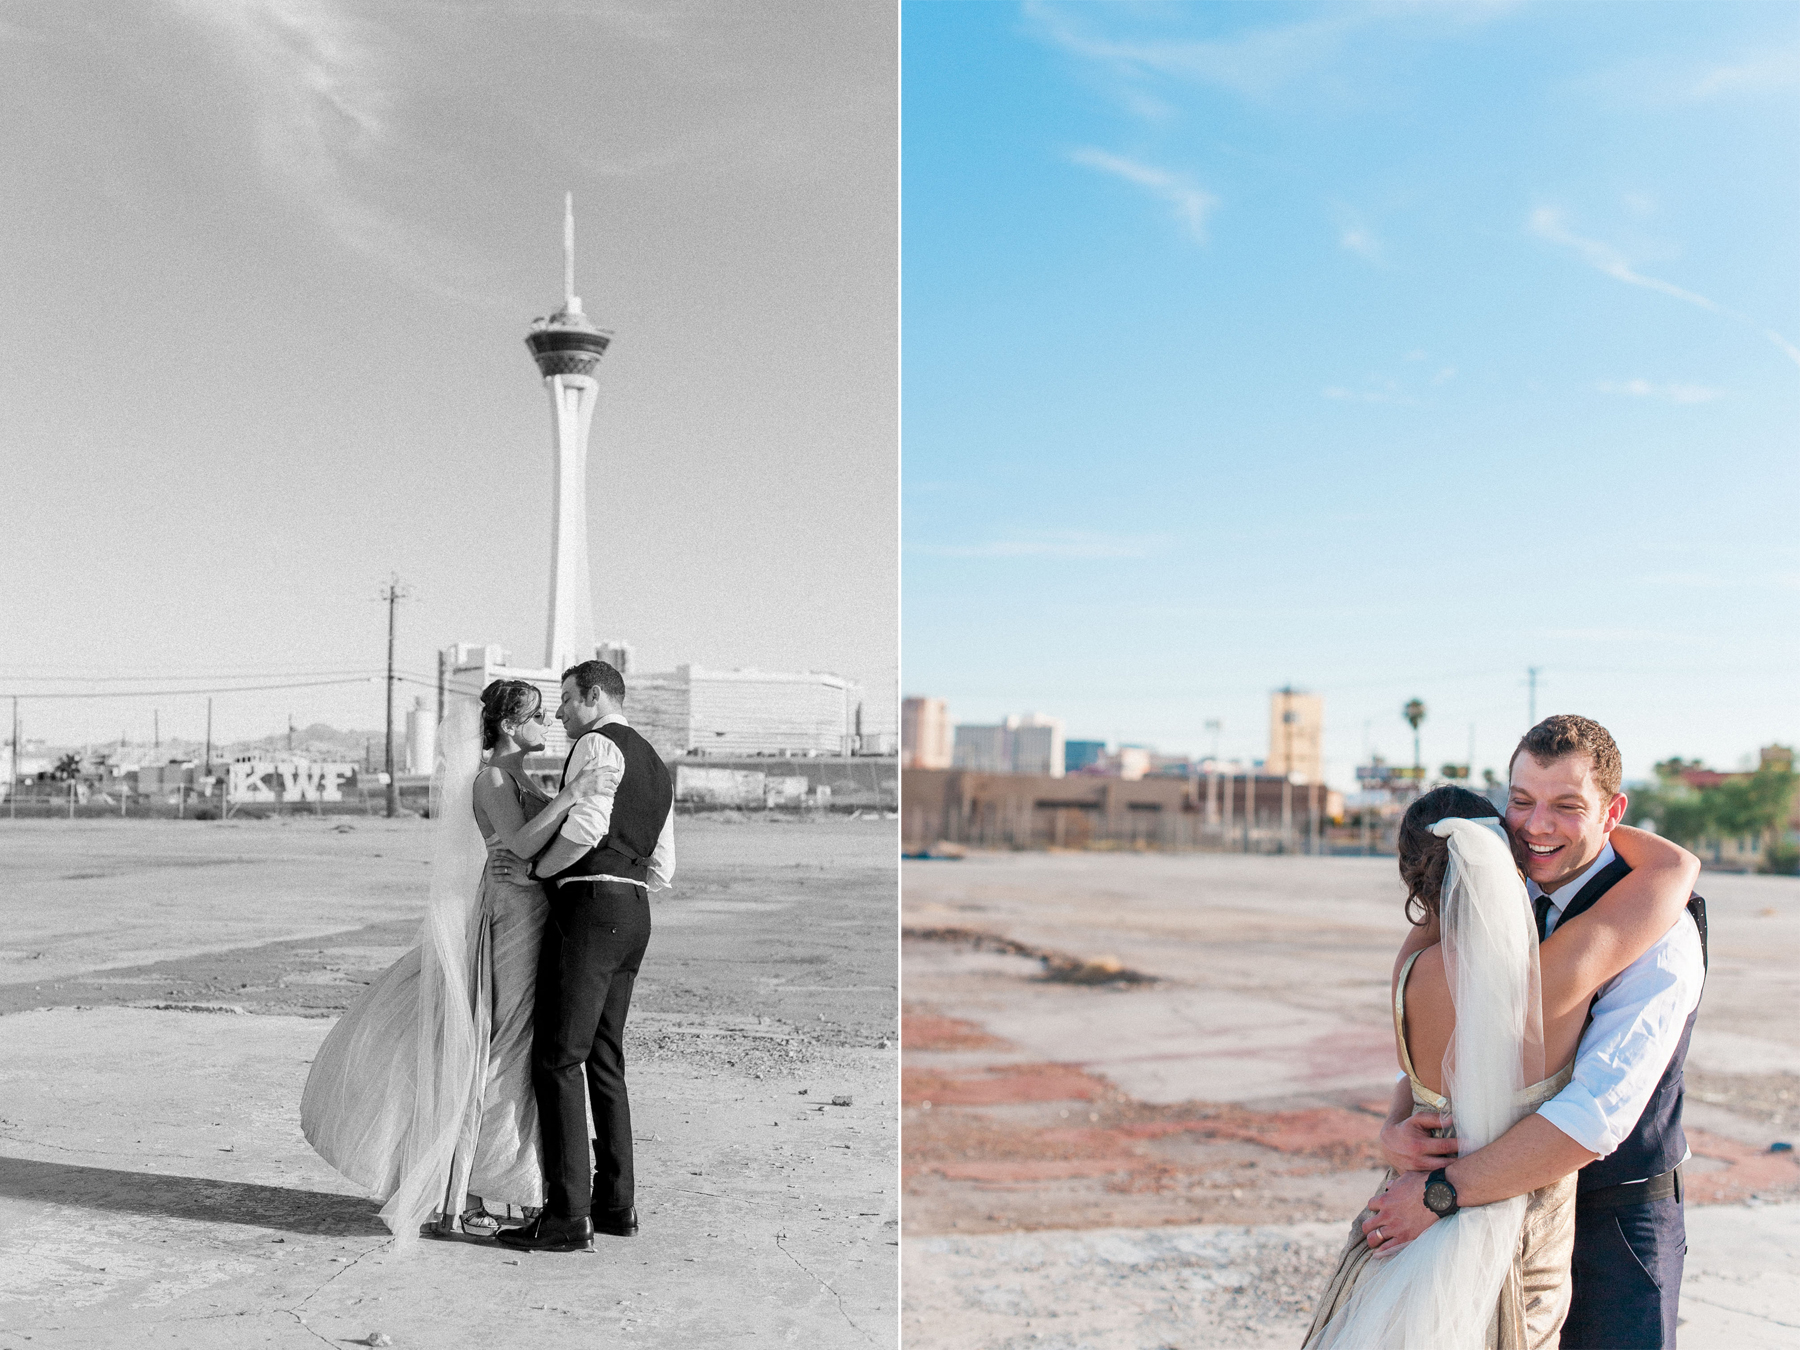 A very happy and in love bride and groom in Las Vegas. Wedding photography by Briana Morrison